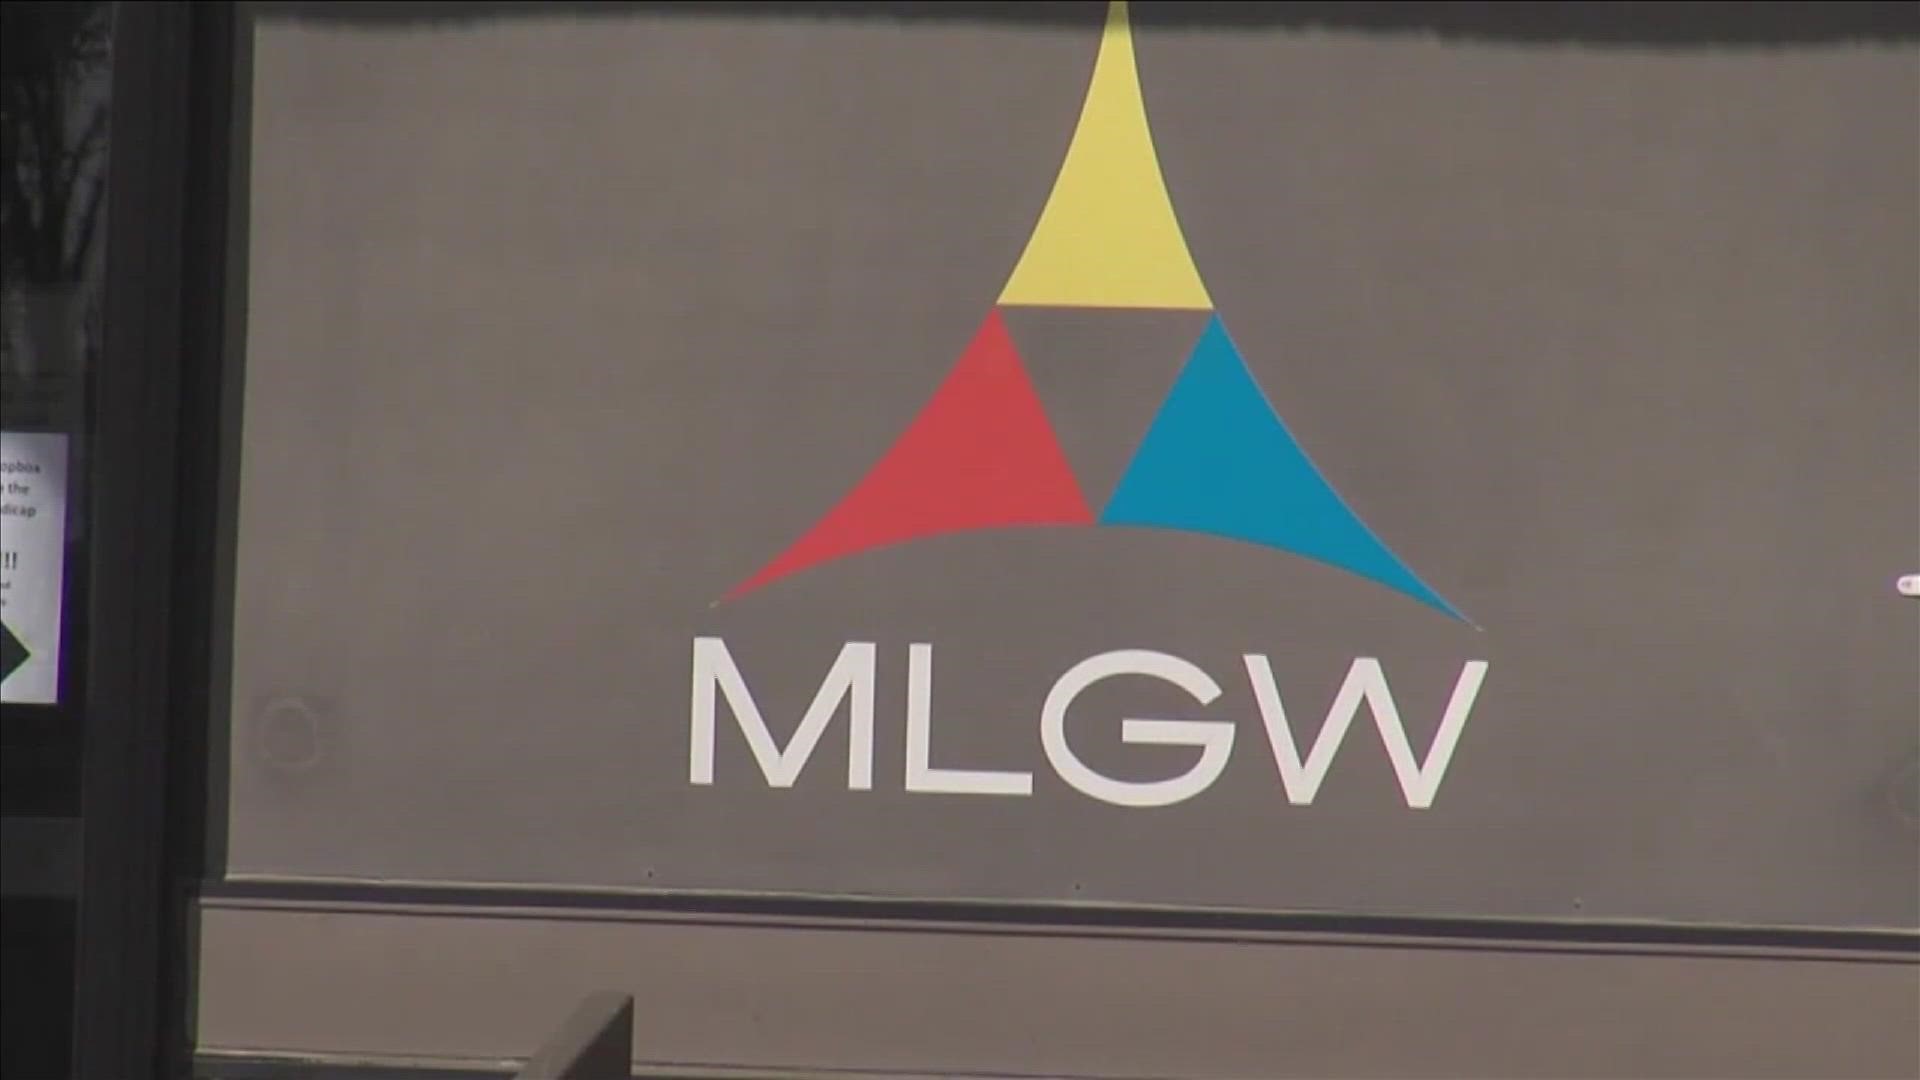 MLGW CEO Doug McGowen said that the increase of meter exceptions is likely due to recovery from rolling blackouts and water crisis.